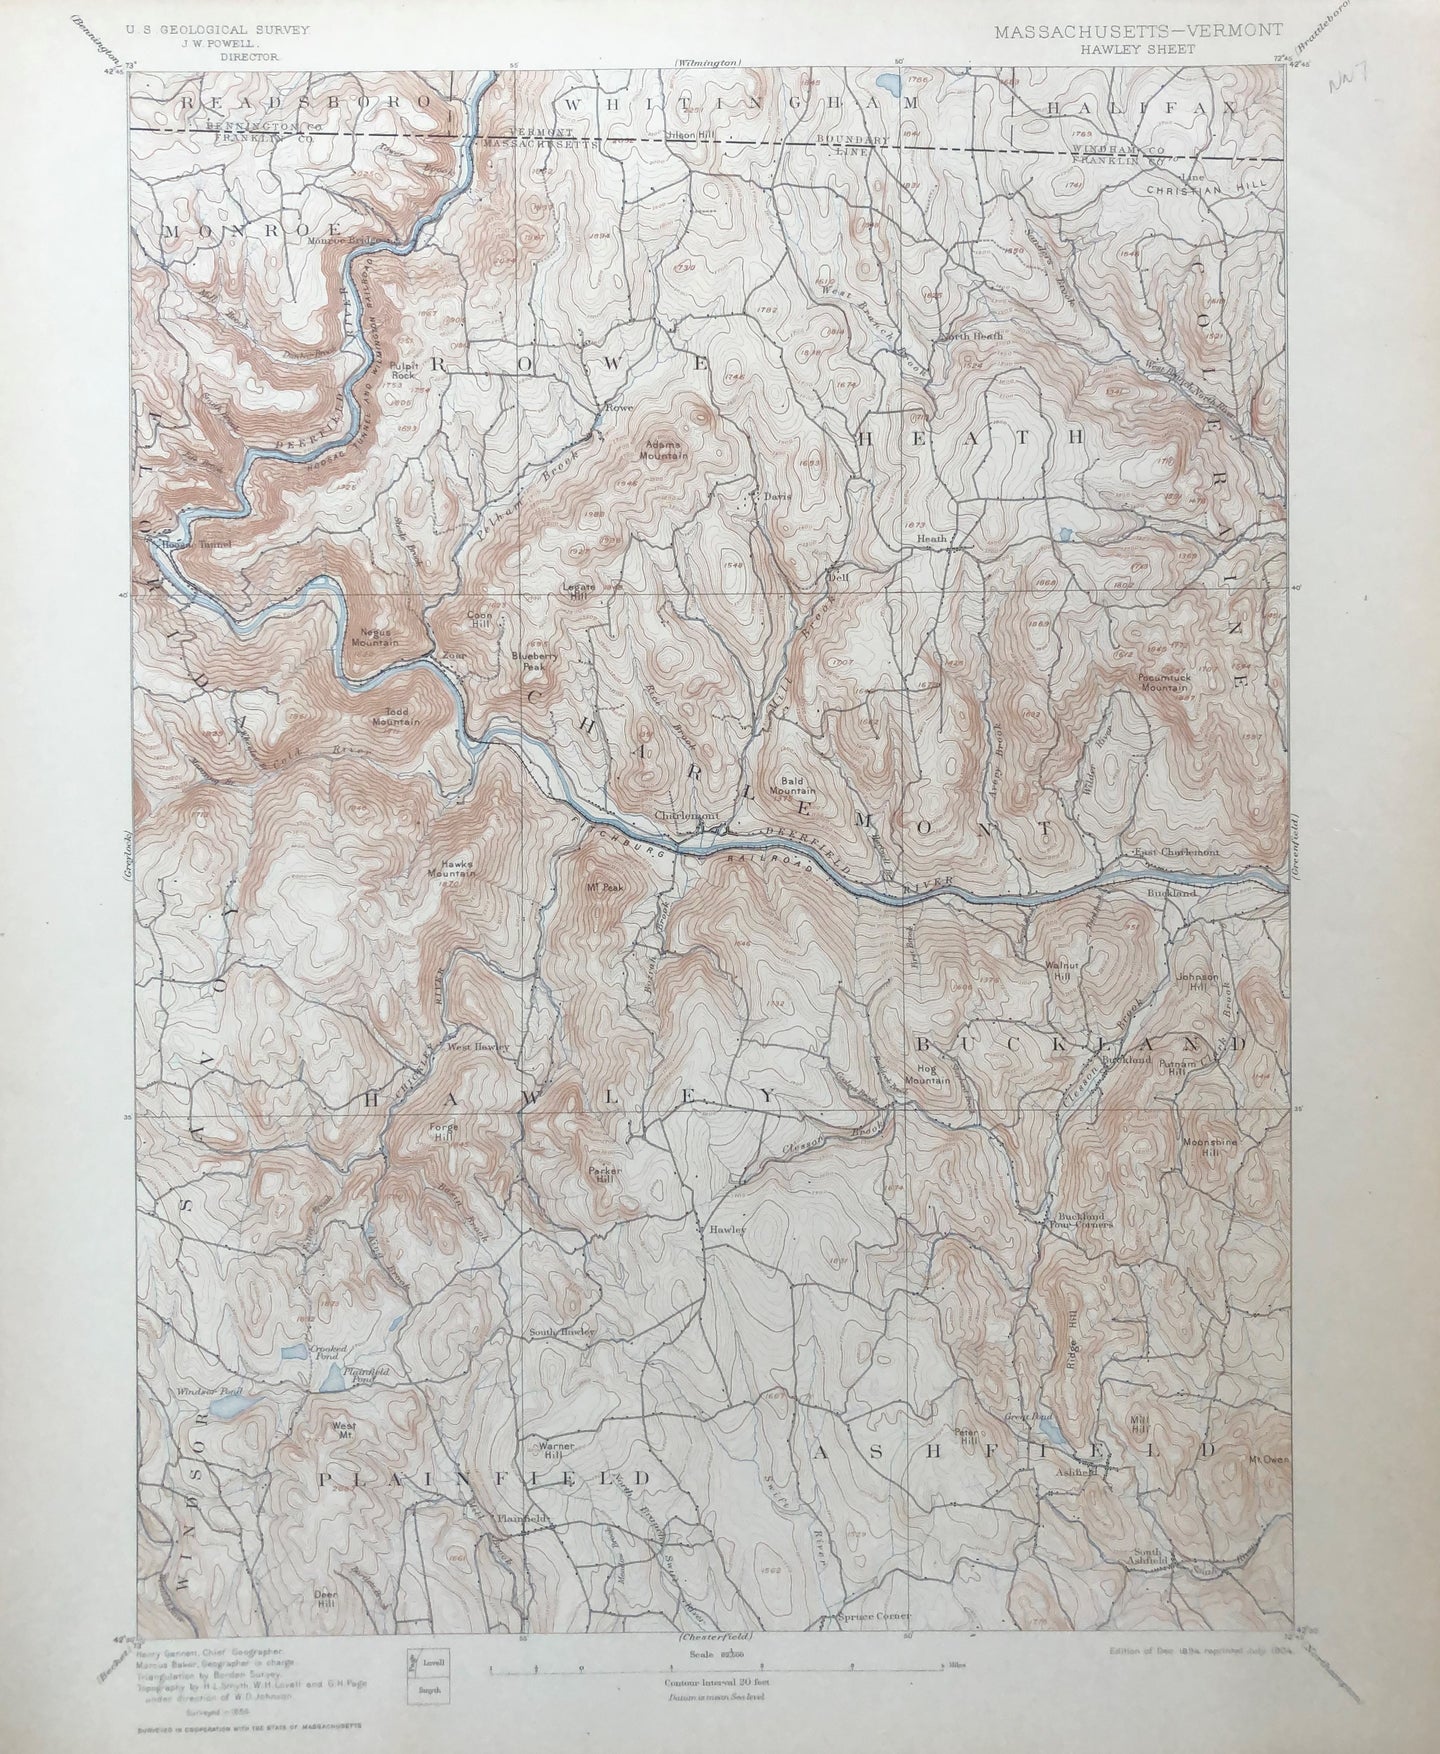 Genuine-Antique-Topographic-map-Hawley-and-Charlemont-Massachusetts-MA-Antique-Topo-Map-Antique-Geological-&-Topographical-Maps-Massachusetts-1904-USGS-Maps-Of-Antiquity-1800s-19th-century